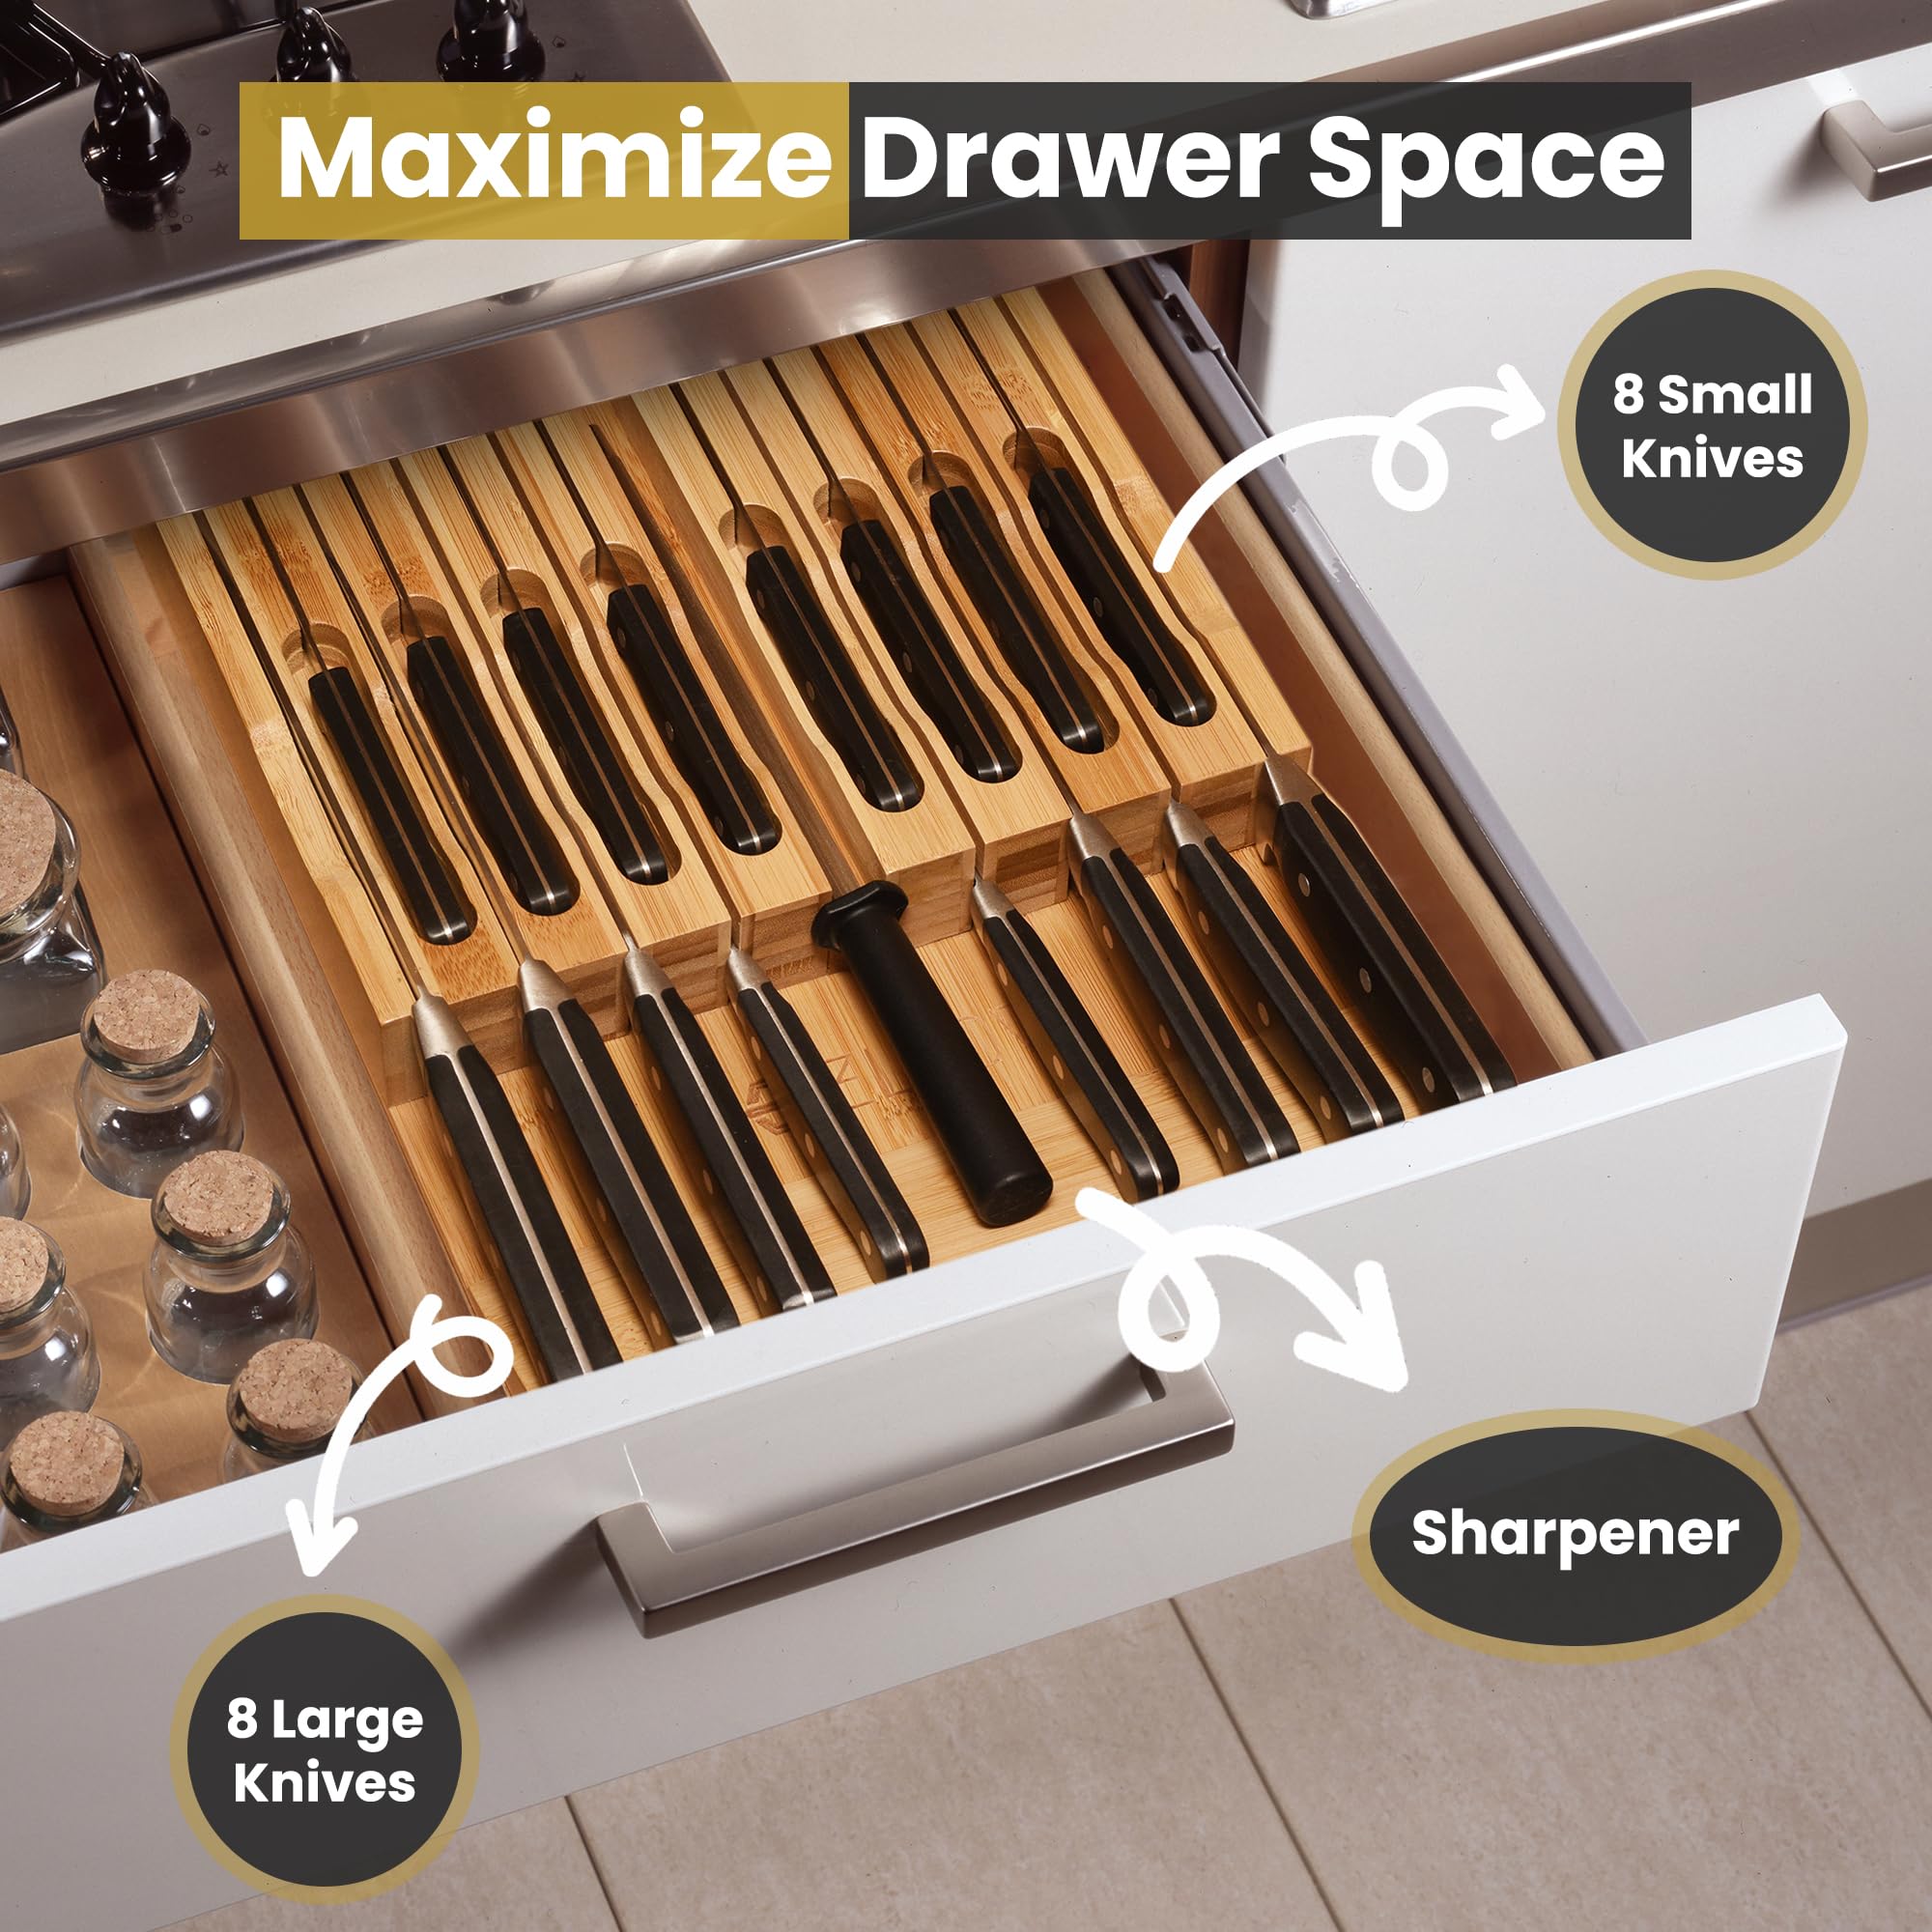 Eltow Bamboo Knife Drawer Organizer, In-Drawer Universal Knife Block with Safety Slots for 16 Knives (Not Included) and Slot for Knife Sharpener, Elegantly Crafted from Premium Moso Bamboo